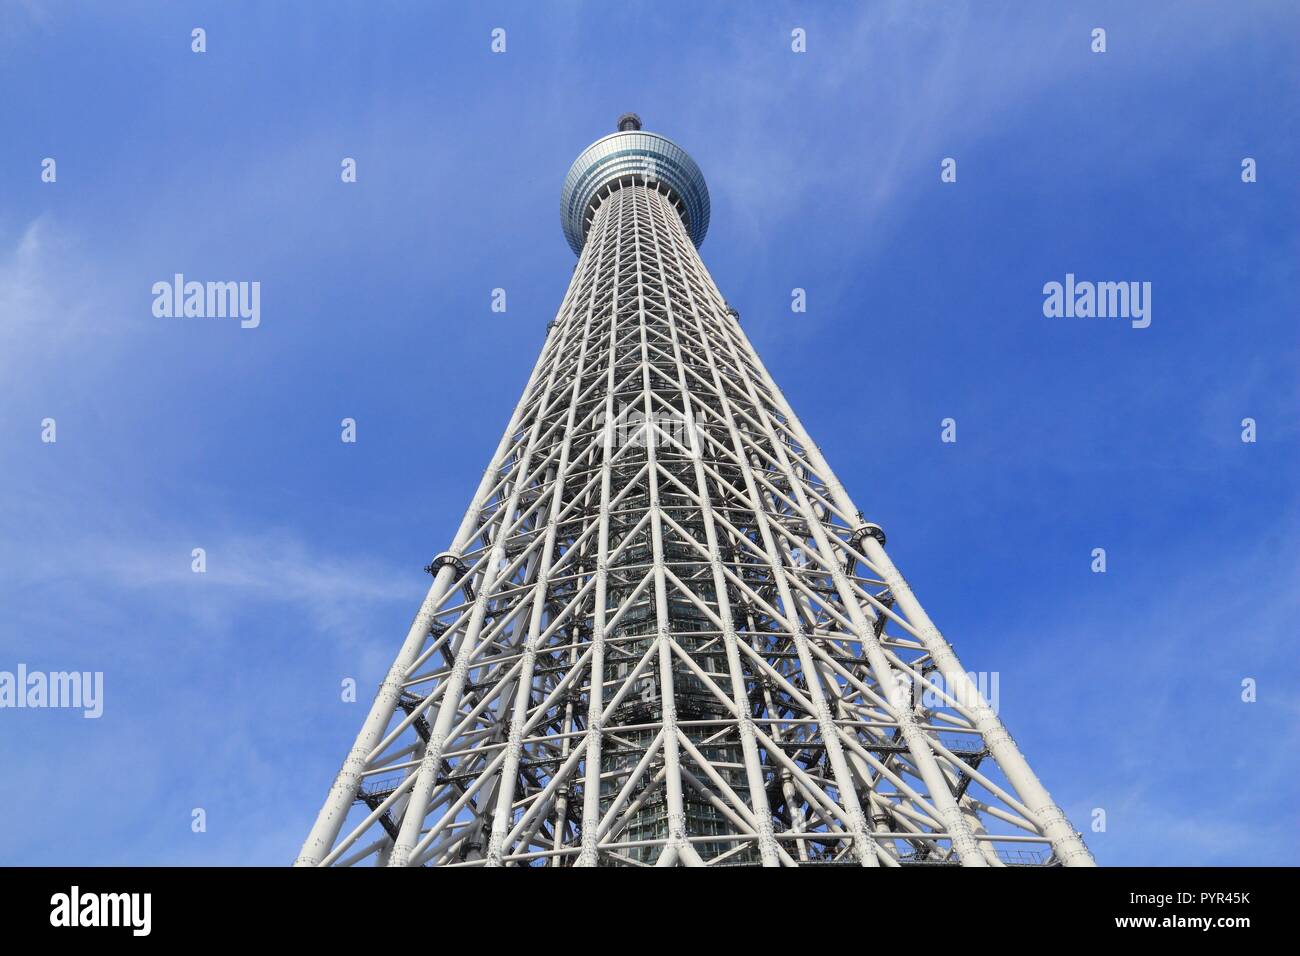 TOKYO, JAPAN - NOVEMBER 30, 2016: Skytree tower in Tokyo, Japan. The 634m tall broadcasting tower is the 2nd tallest structure in the world. Stock Photo